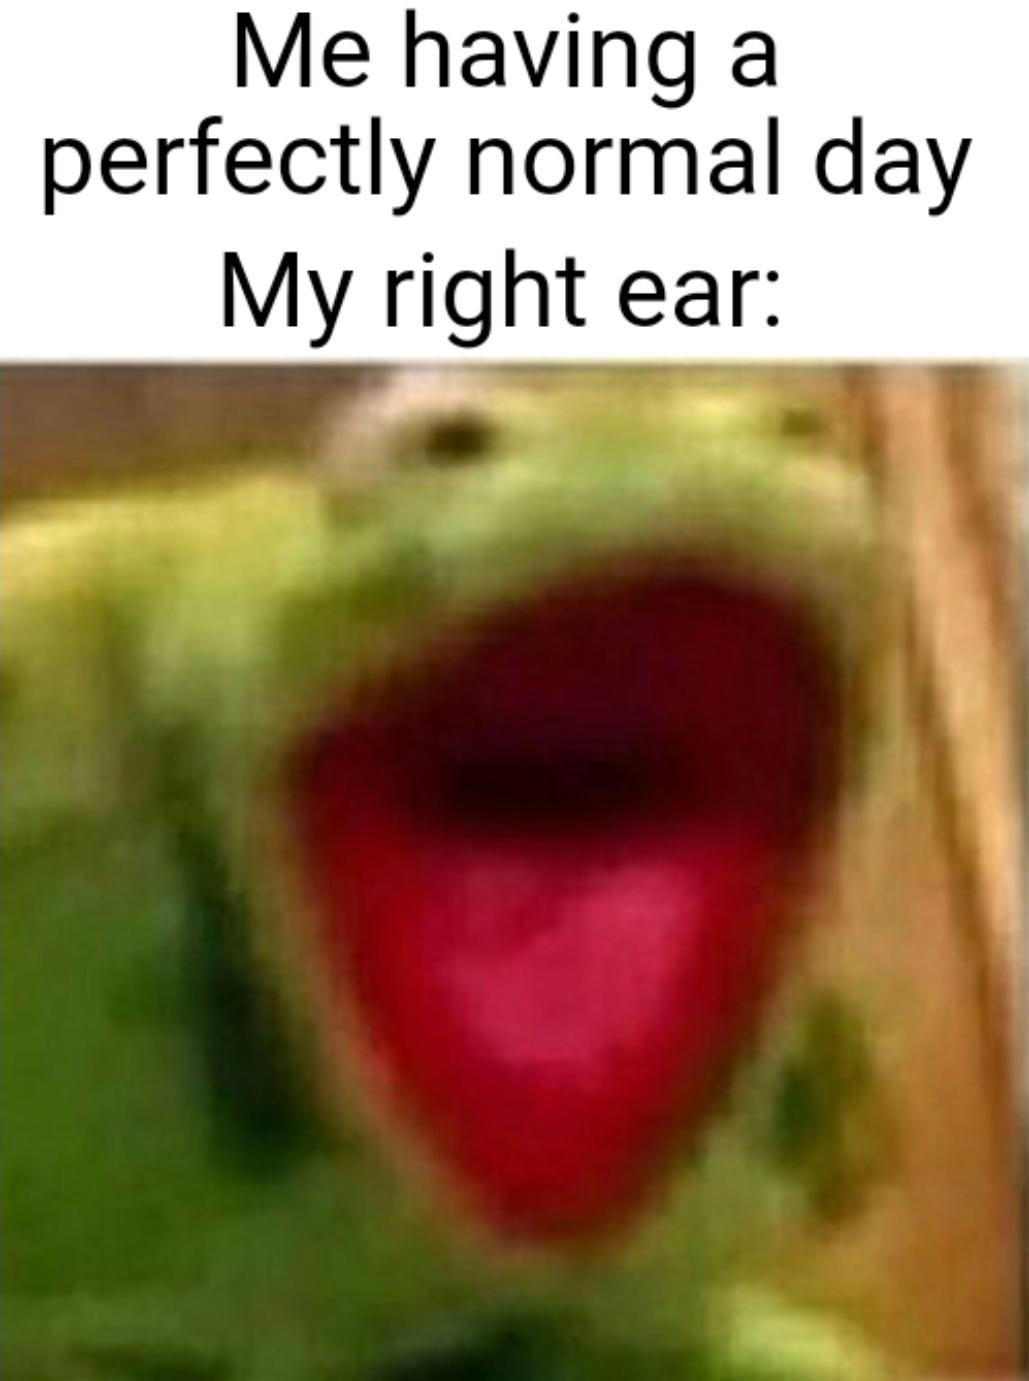 fresh memes - memes for memenade - Me having a perfectly normal day My right ear